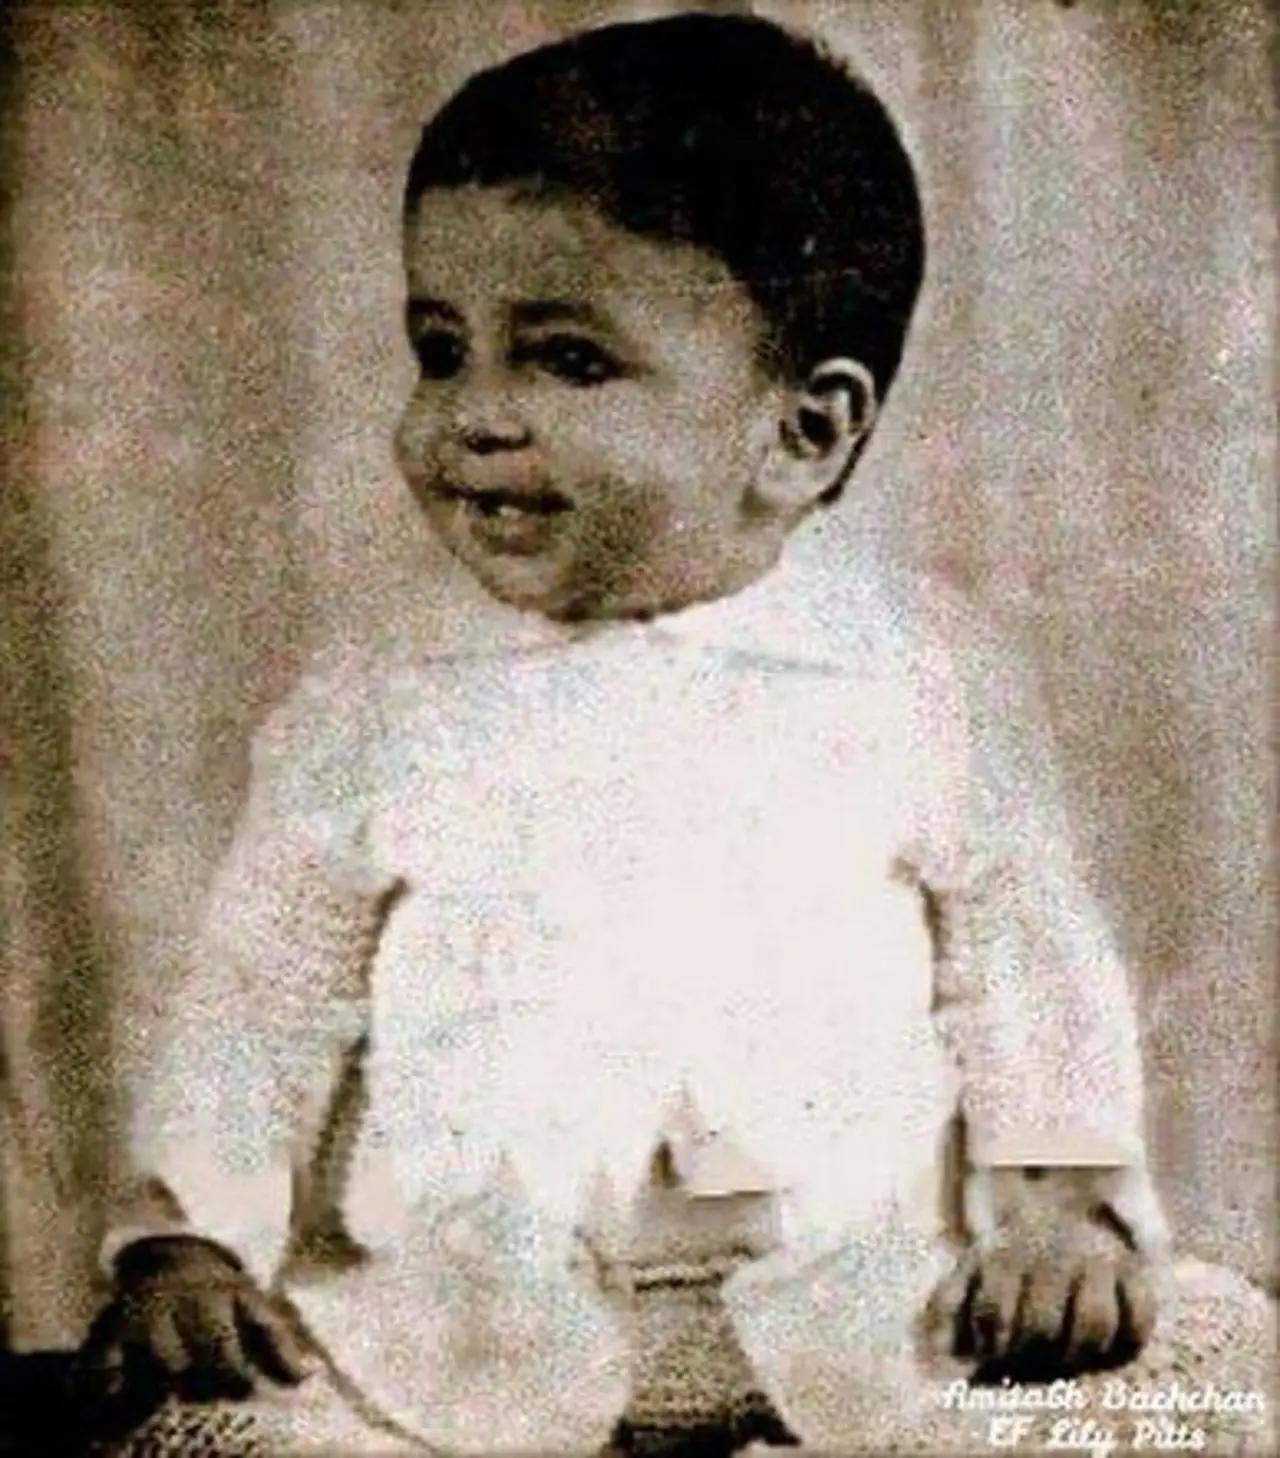 Take a wild guess as to who this is? It's Amitabh Bachchan!